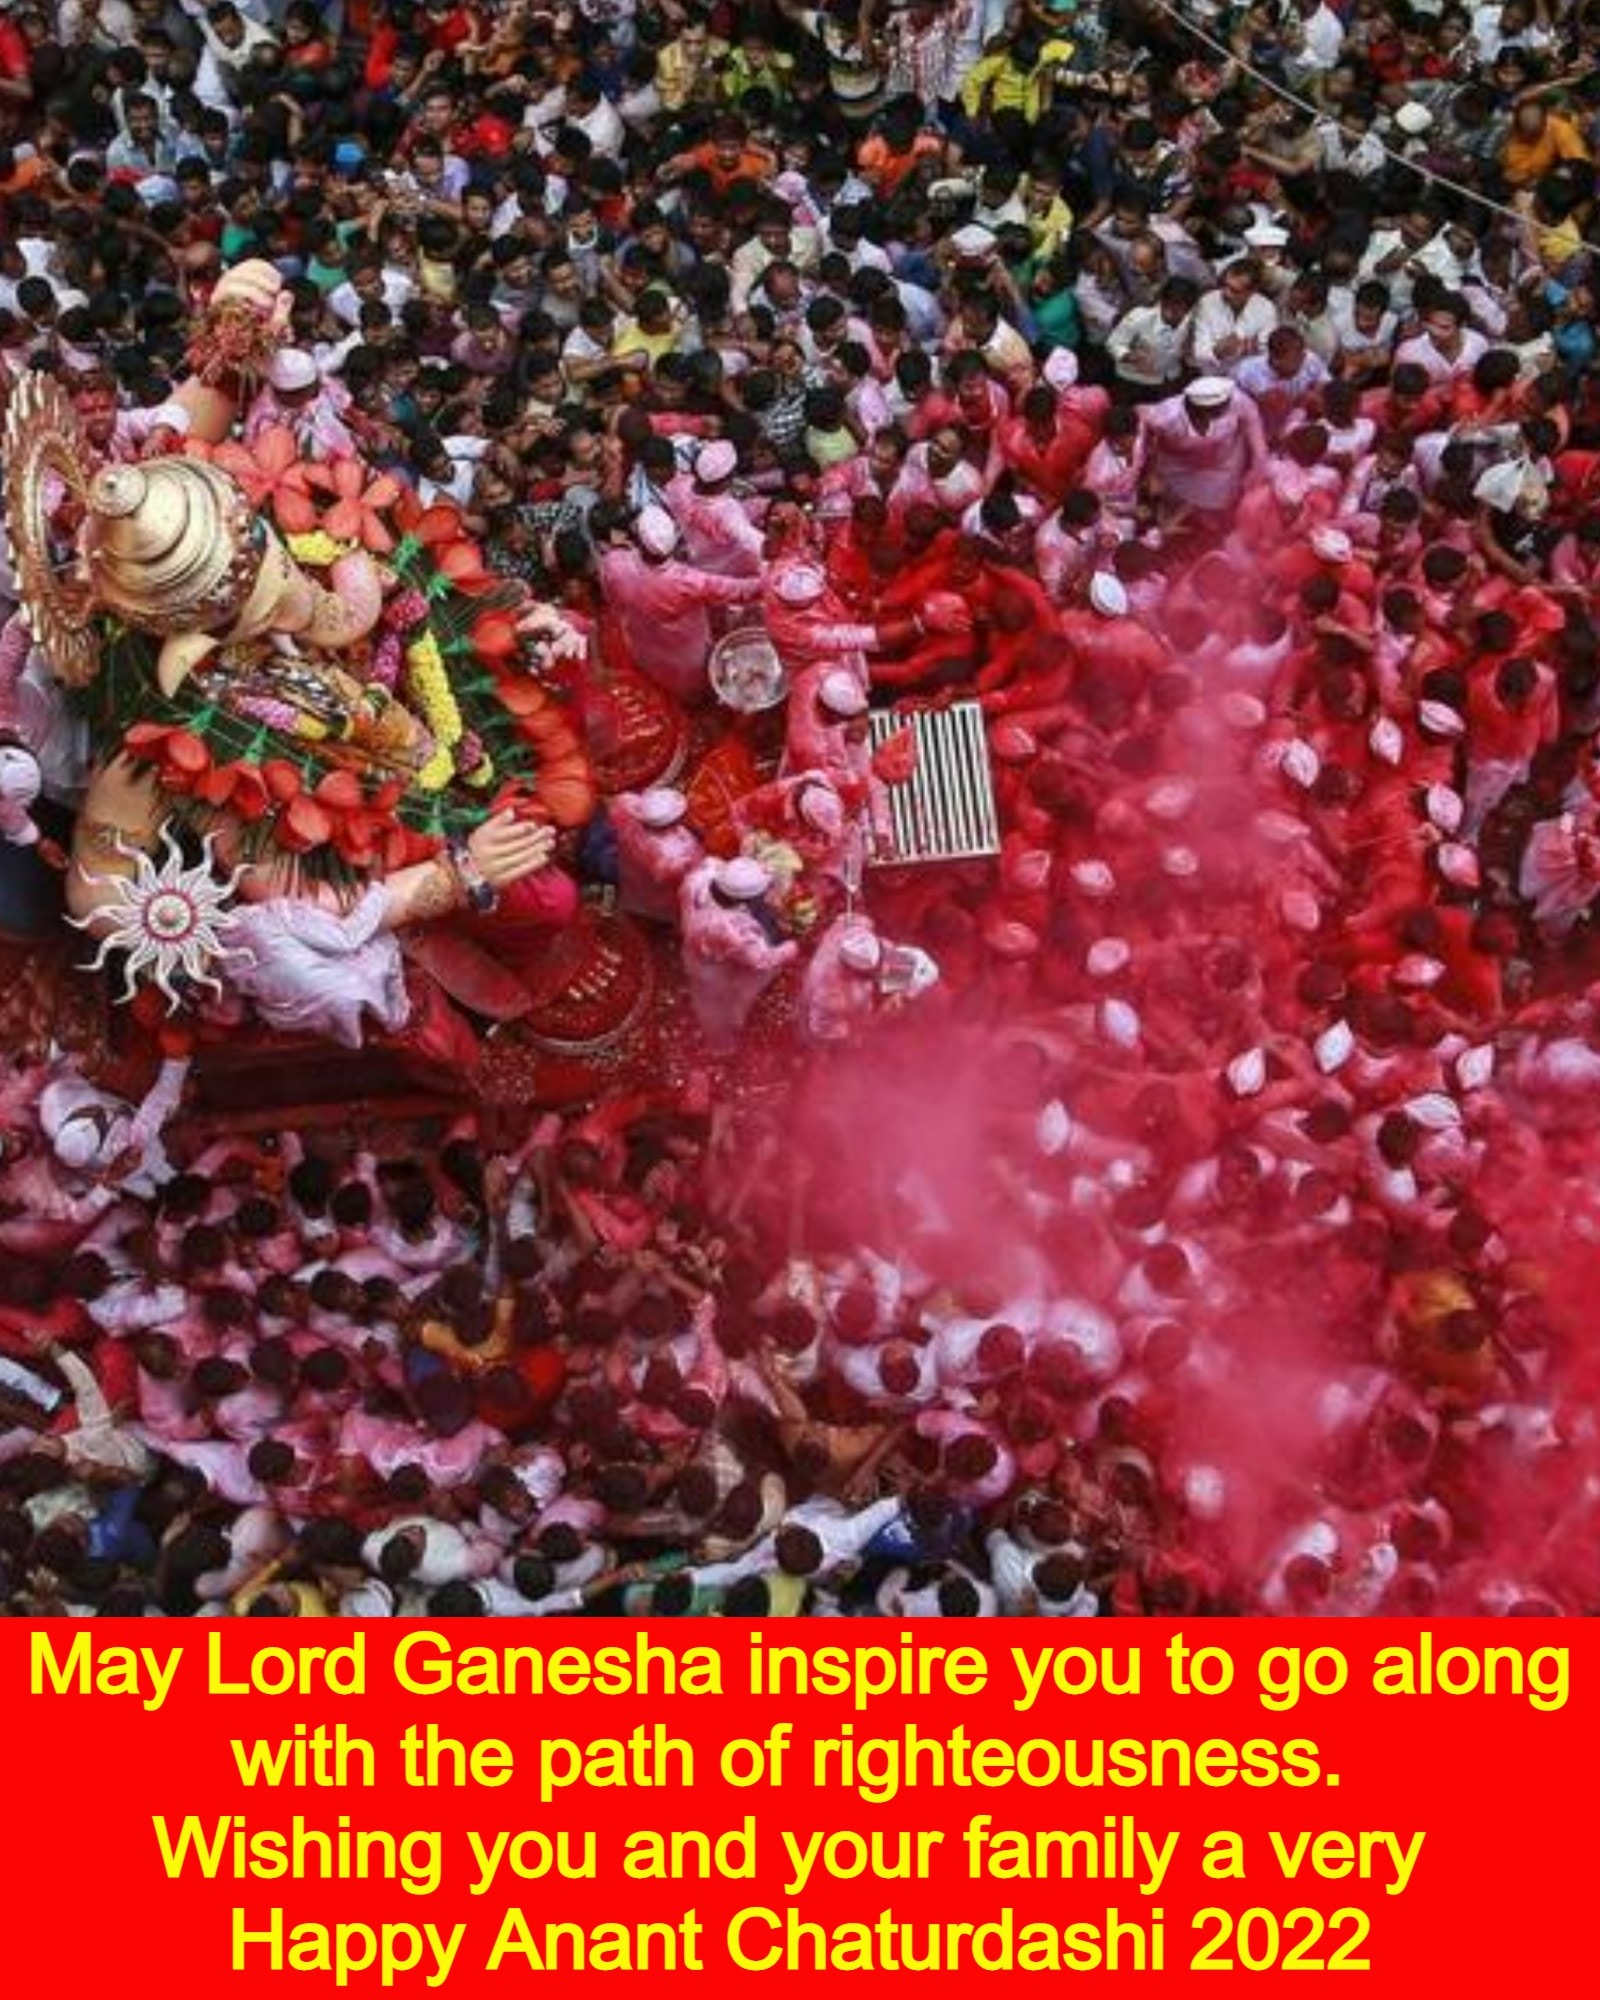 Happy Anant Chaturdashi 2022: Wishes Images, Quotes, Photos, Images, Facebook SMS and Messages to share with your loved ones.  (Image: Shutterstock) 